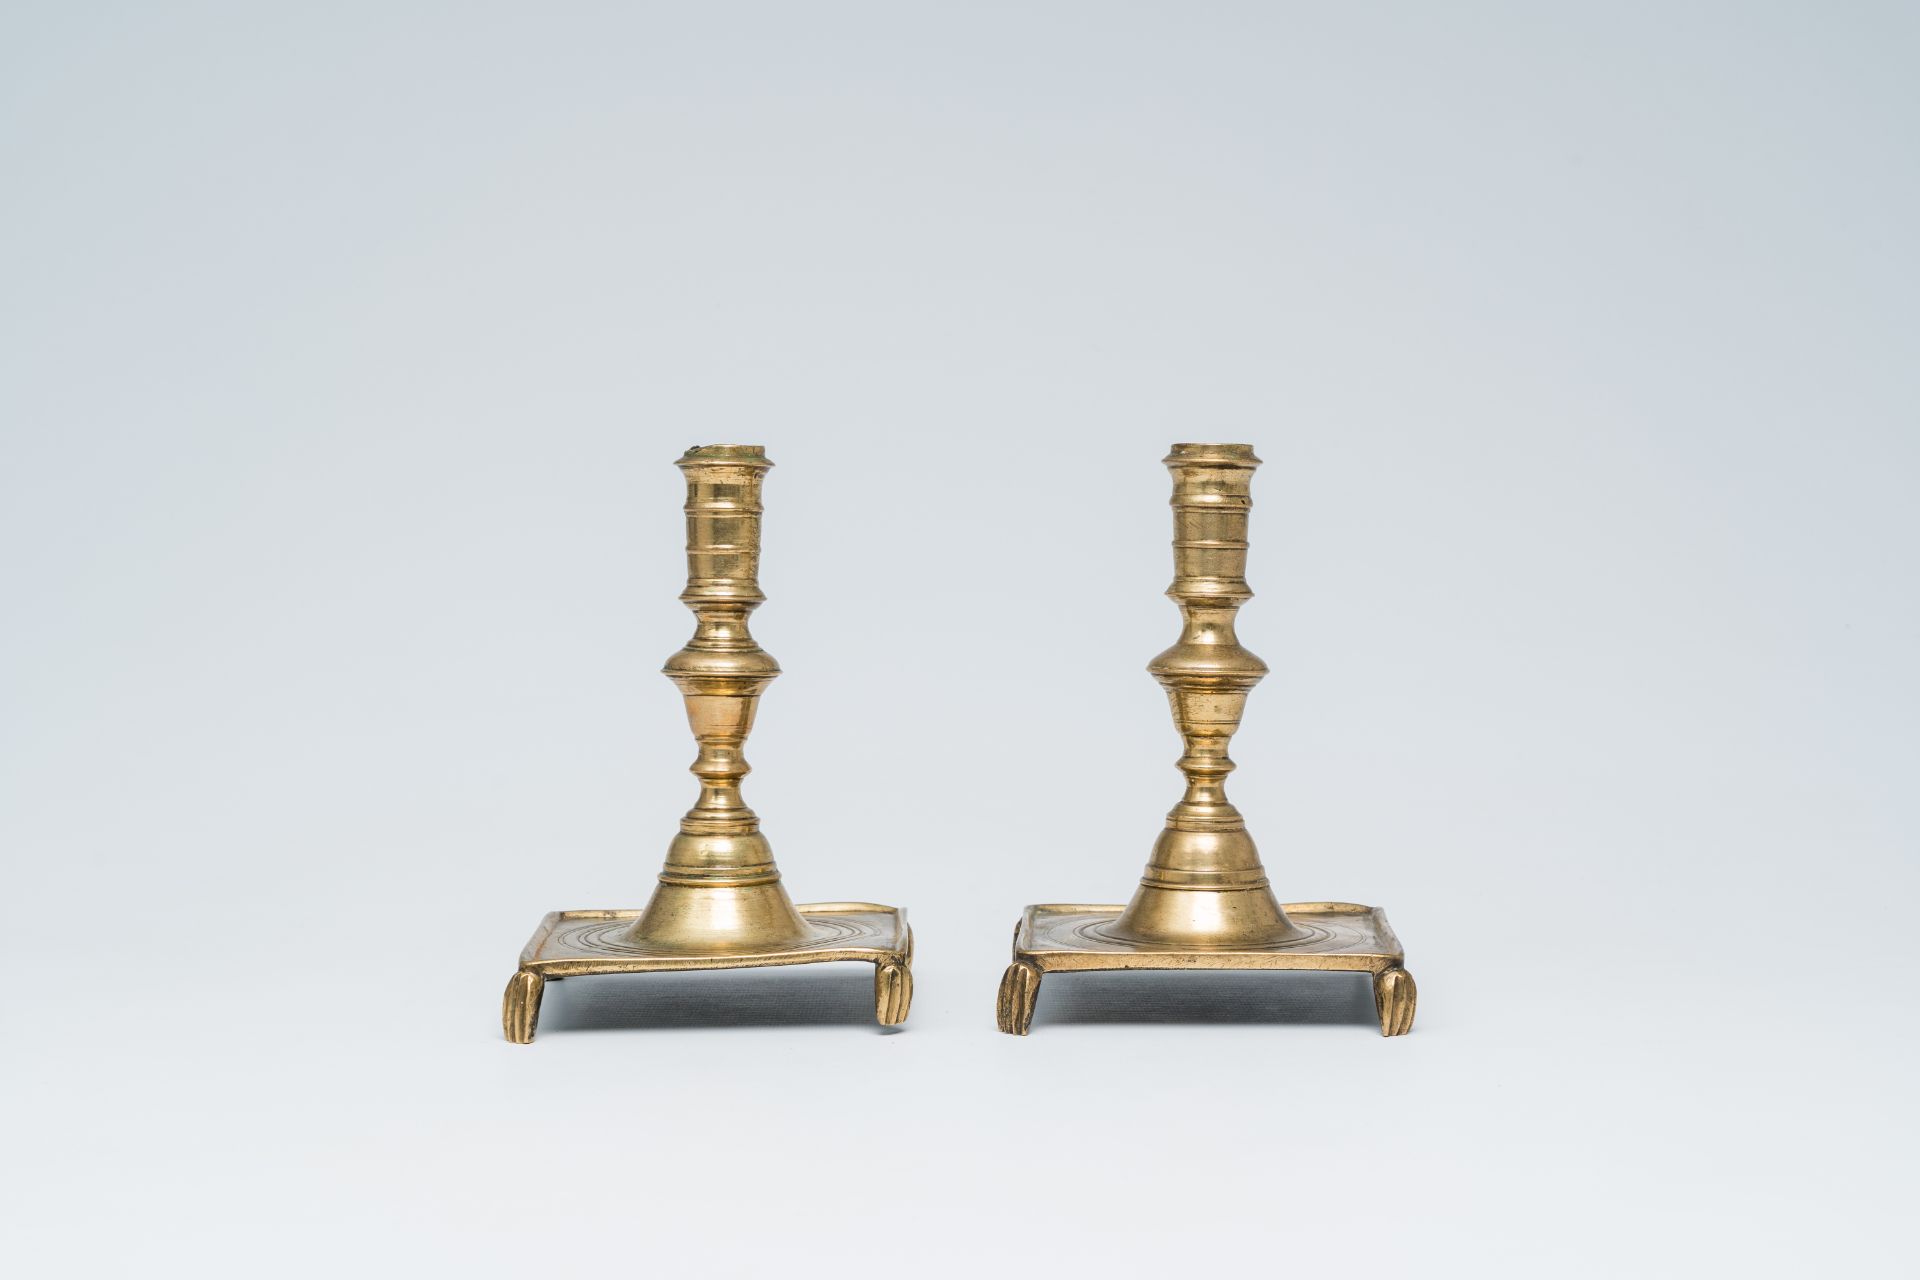 A pair of Spanish brass candlesticks, 17th/18th C. - Image 2 of 7